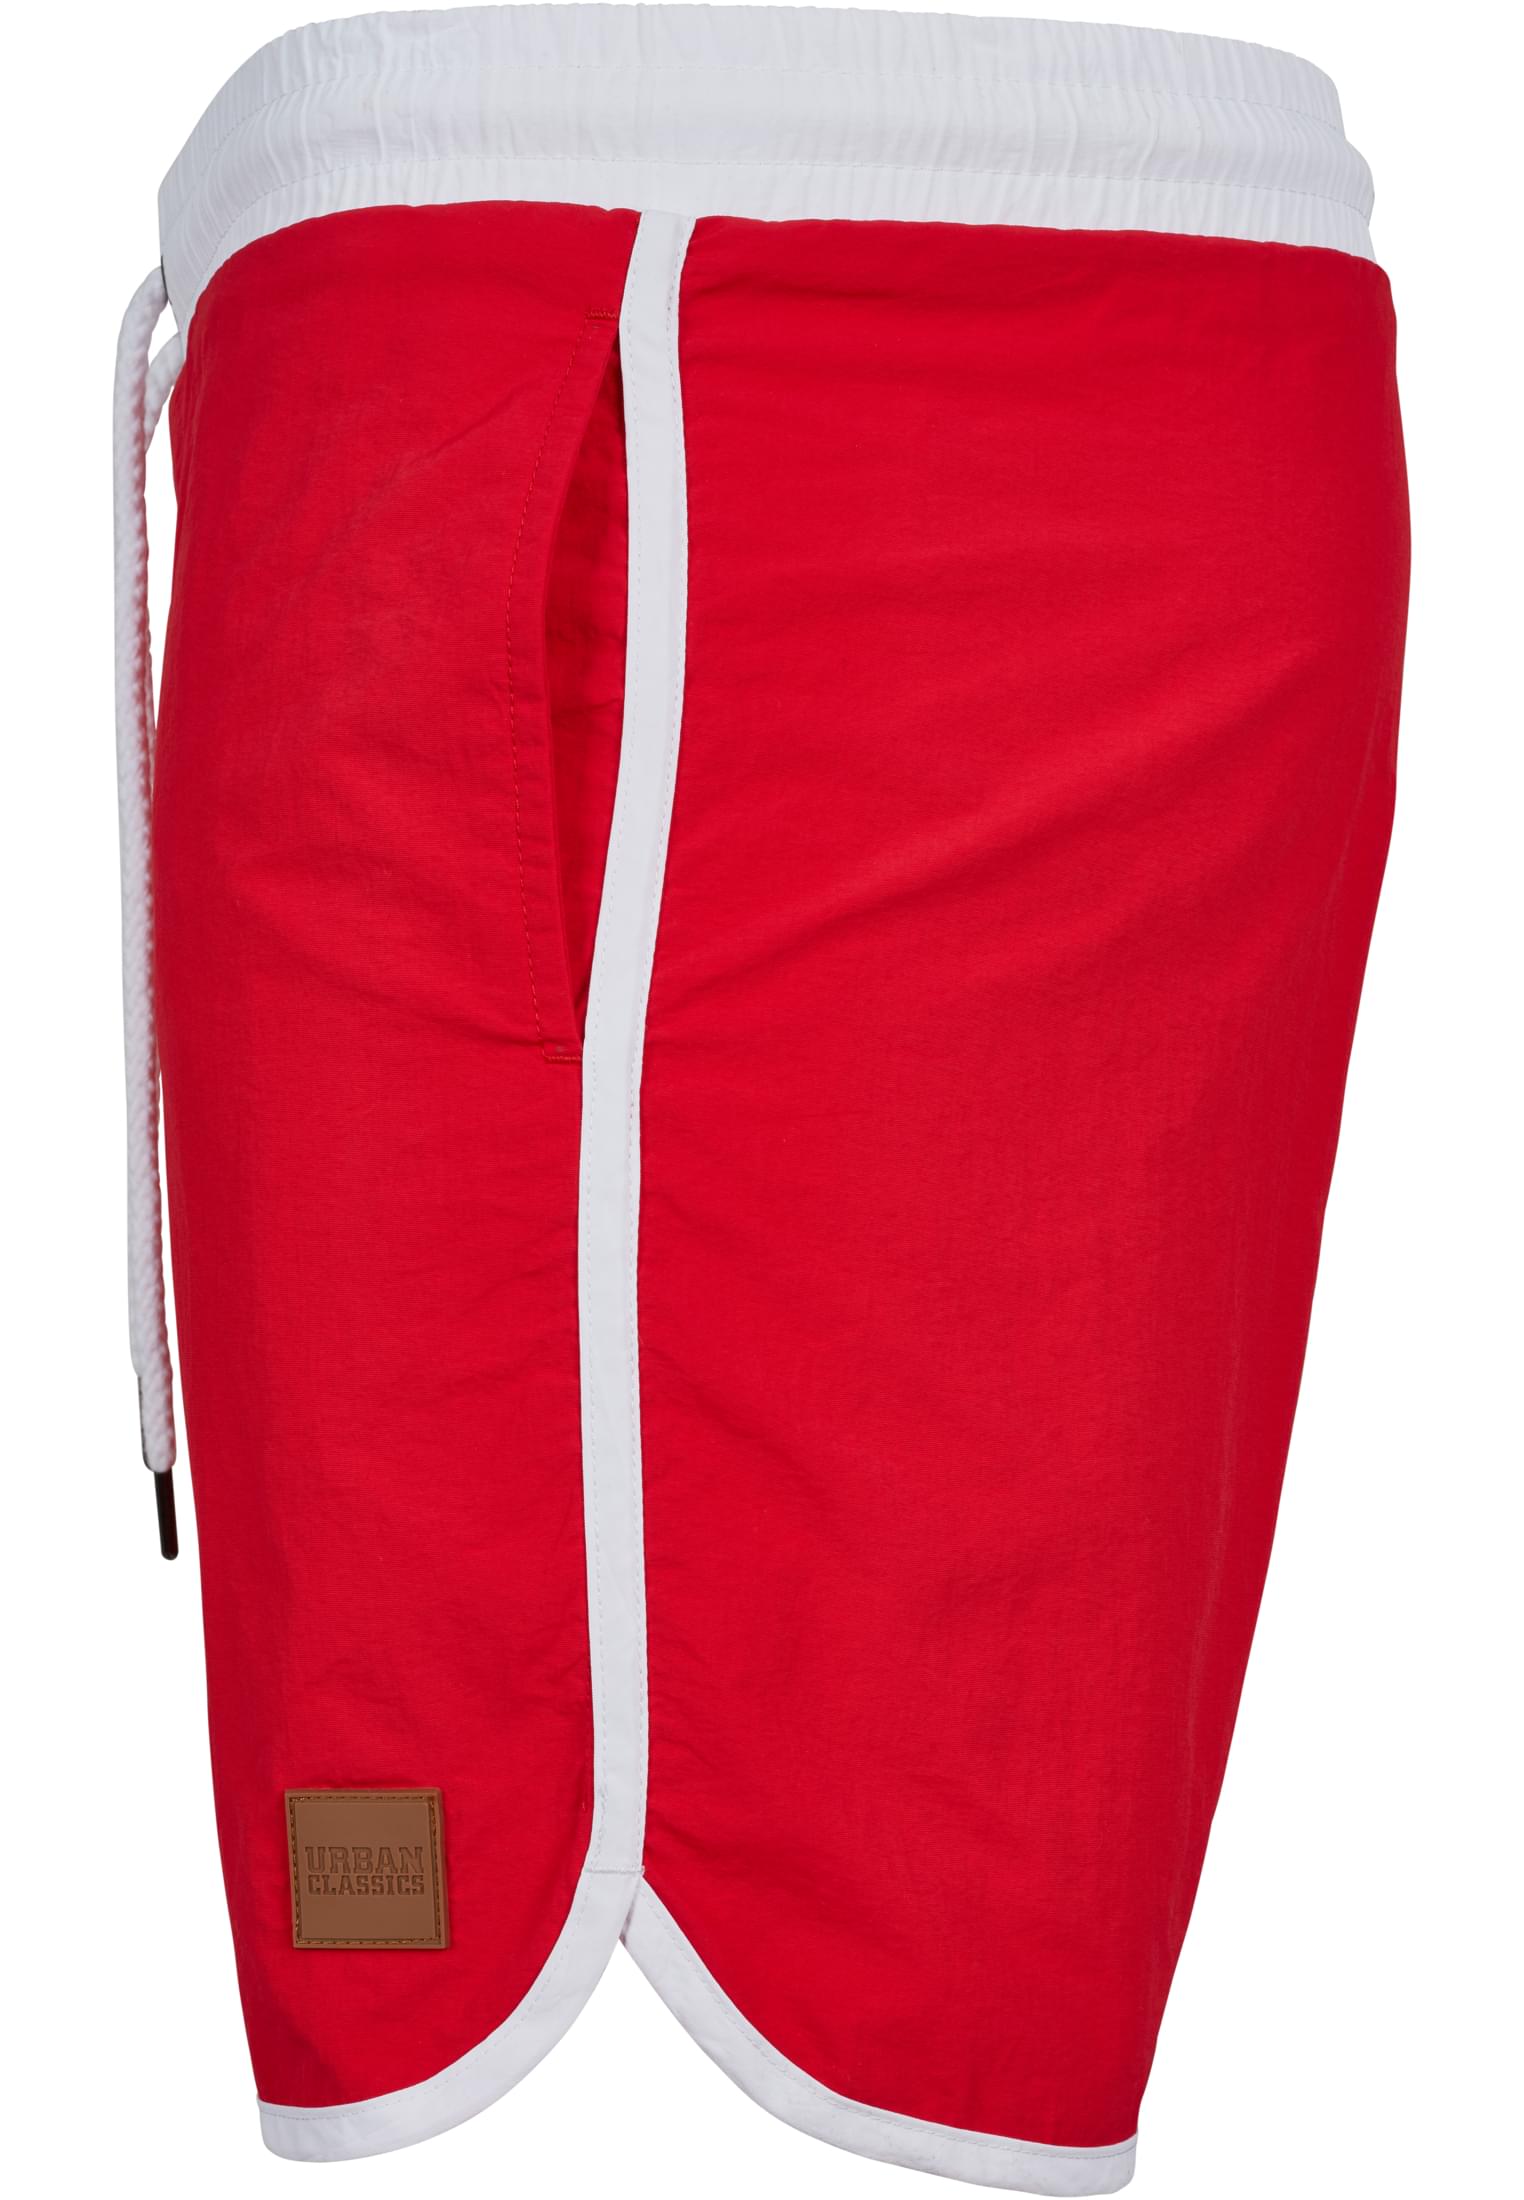 Plus Size Retro Swimshorts in Farbe firered/white